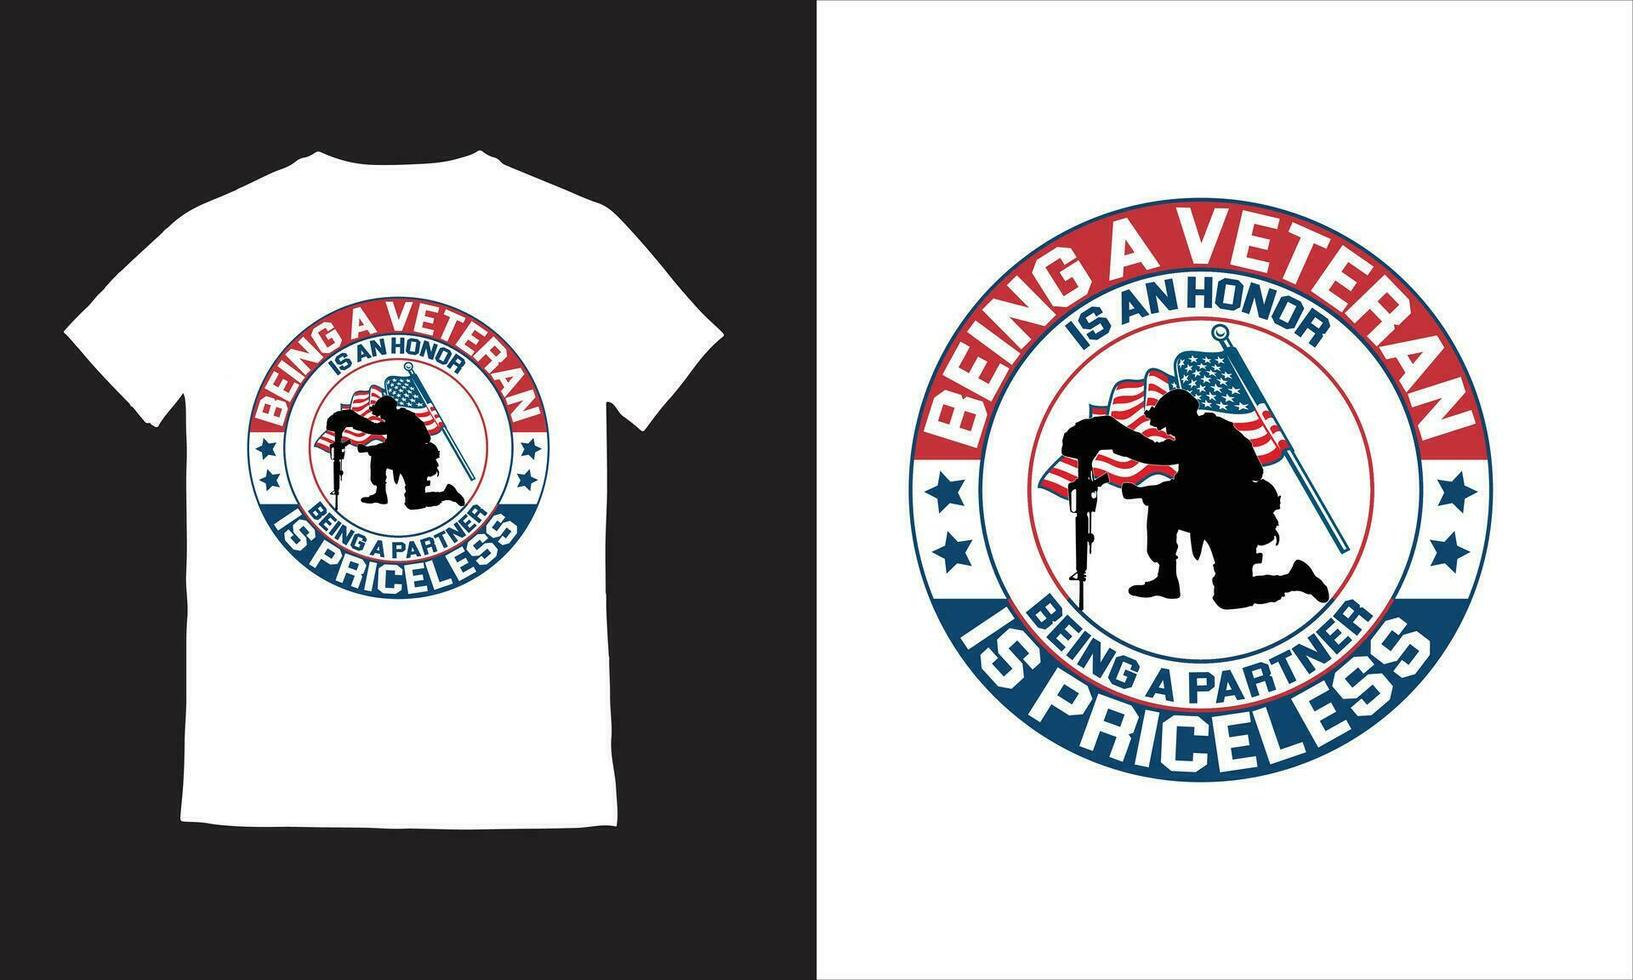 USA soldier military honor the sacrifice veterans day t-shirt design vector